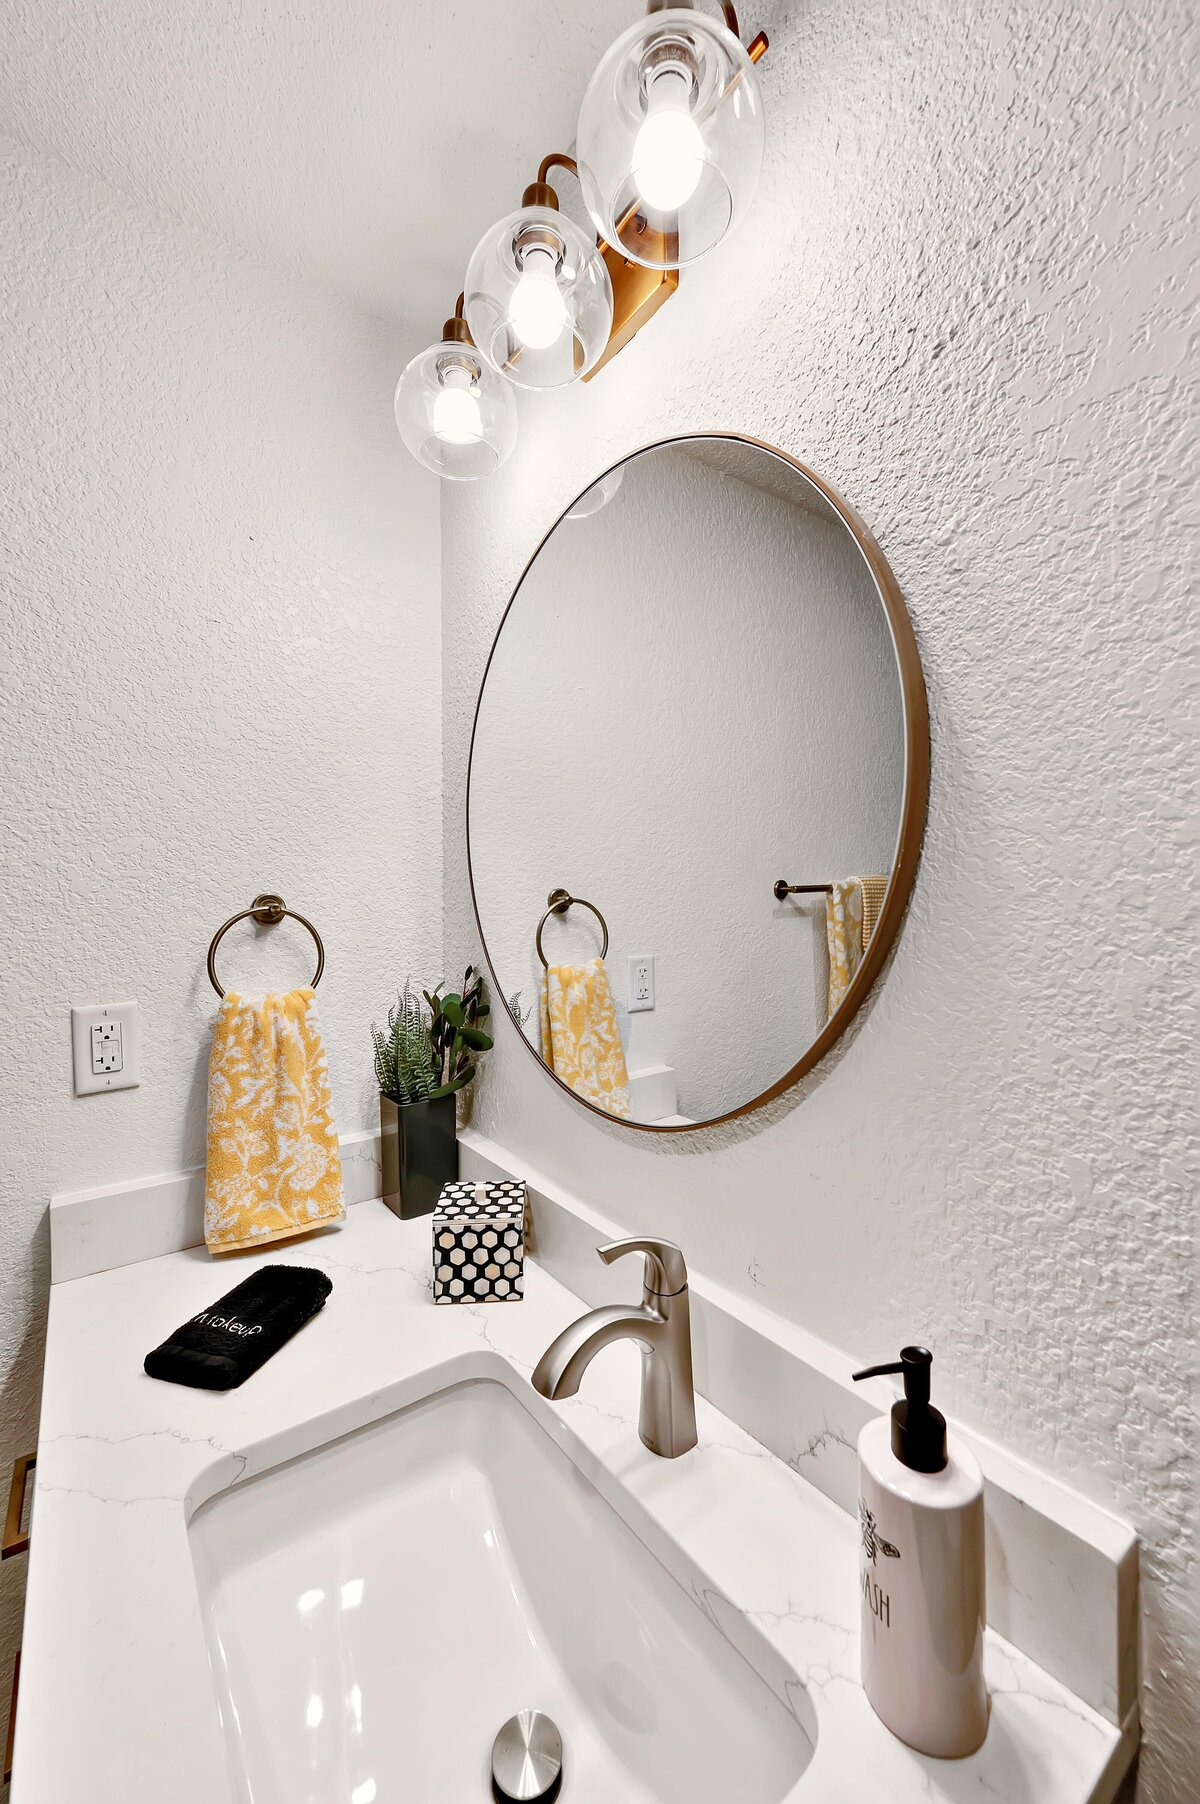 Beautiful bathroom vanity in this one-bedroom, one-bathroom vintage condo that sleeps 4 in the historic Behrens building in the heart of the Magnolia Silo District in downtown Waco, TX.